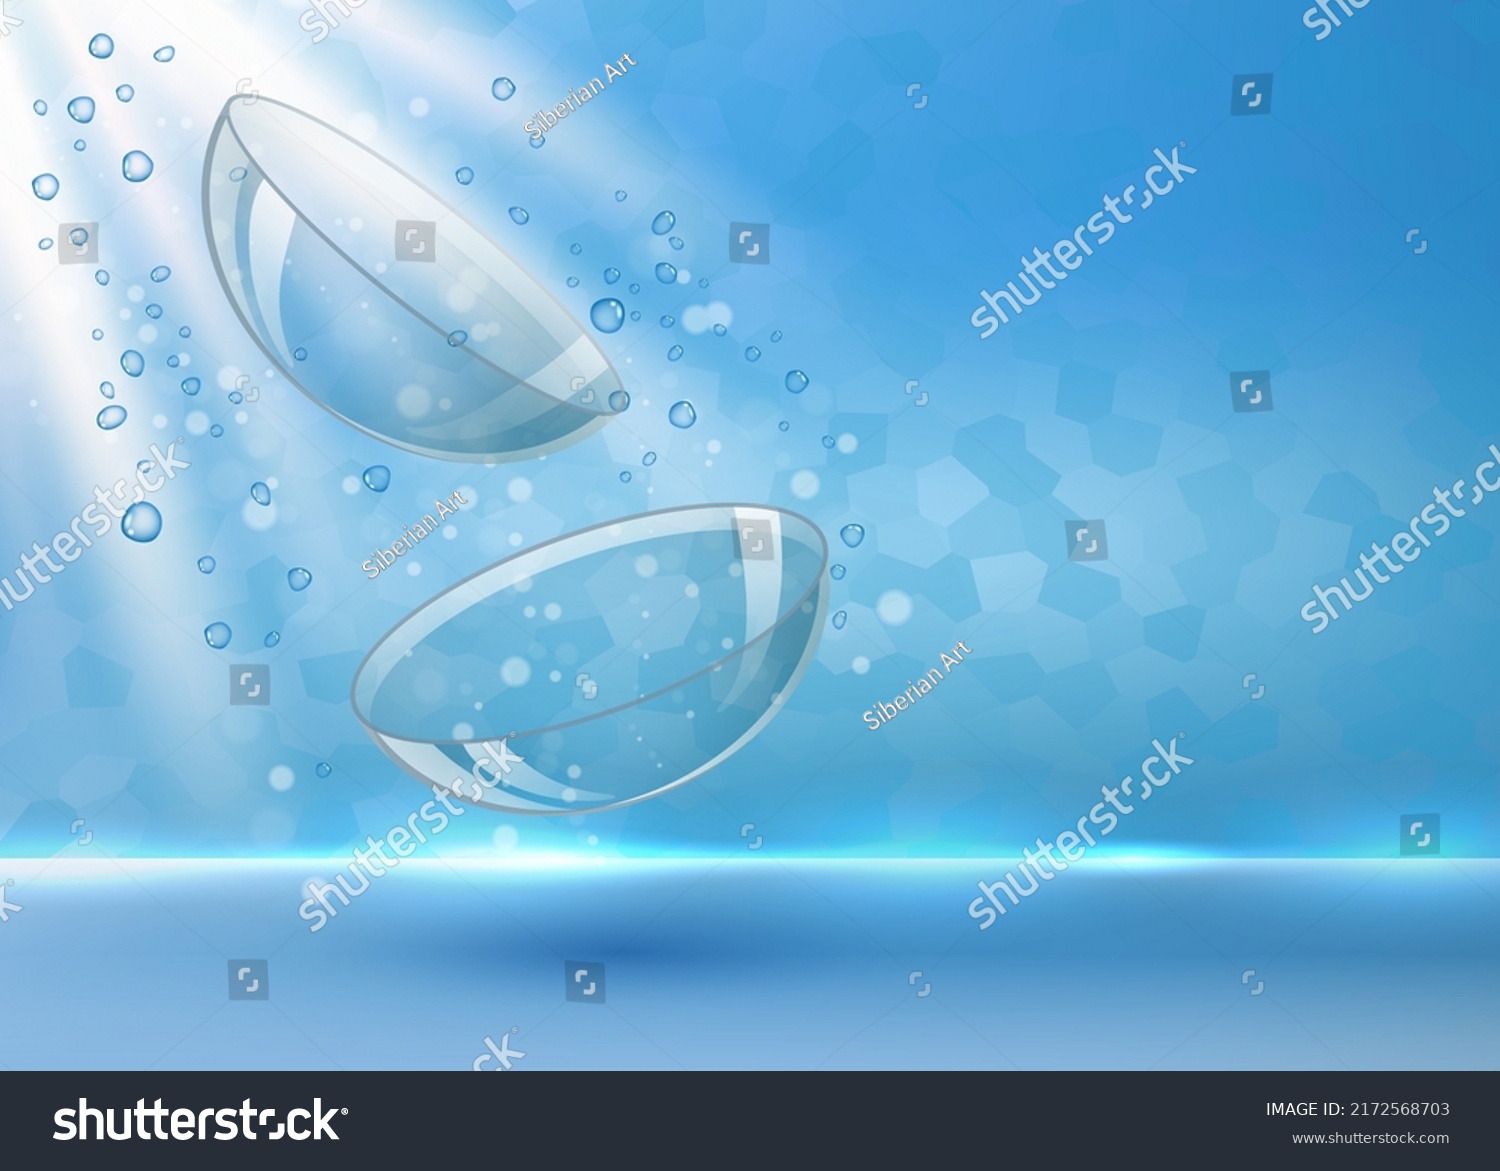 SVG of Realistic contact lenses for eyes in splashing water vector illustration. Ads poster or banner design template. Clear and closeup view mockup. Optic material for vision correction svg